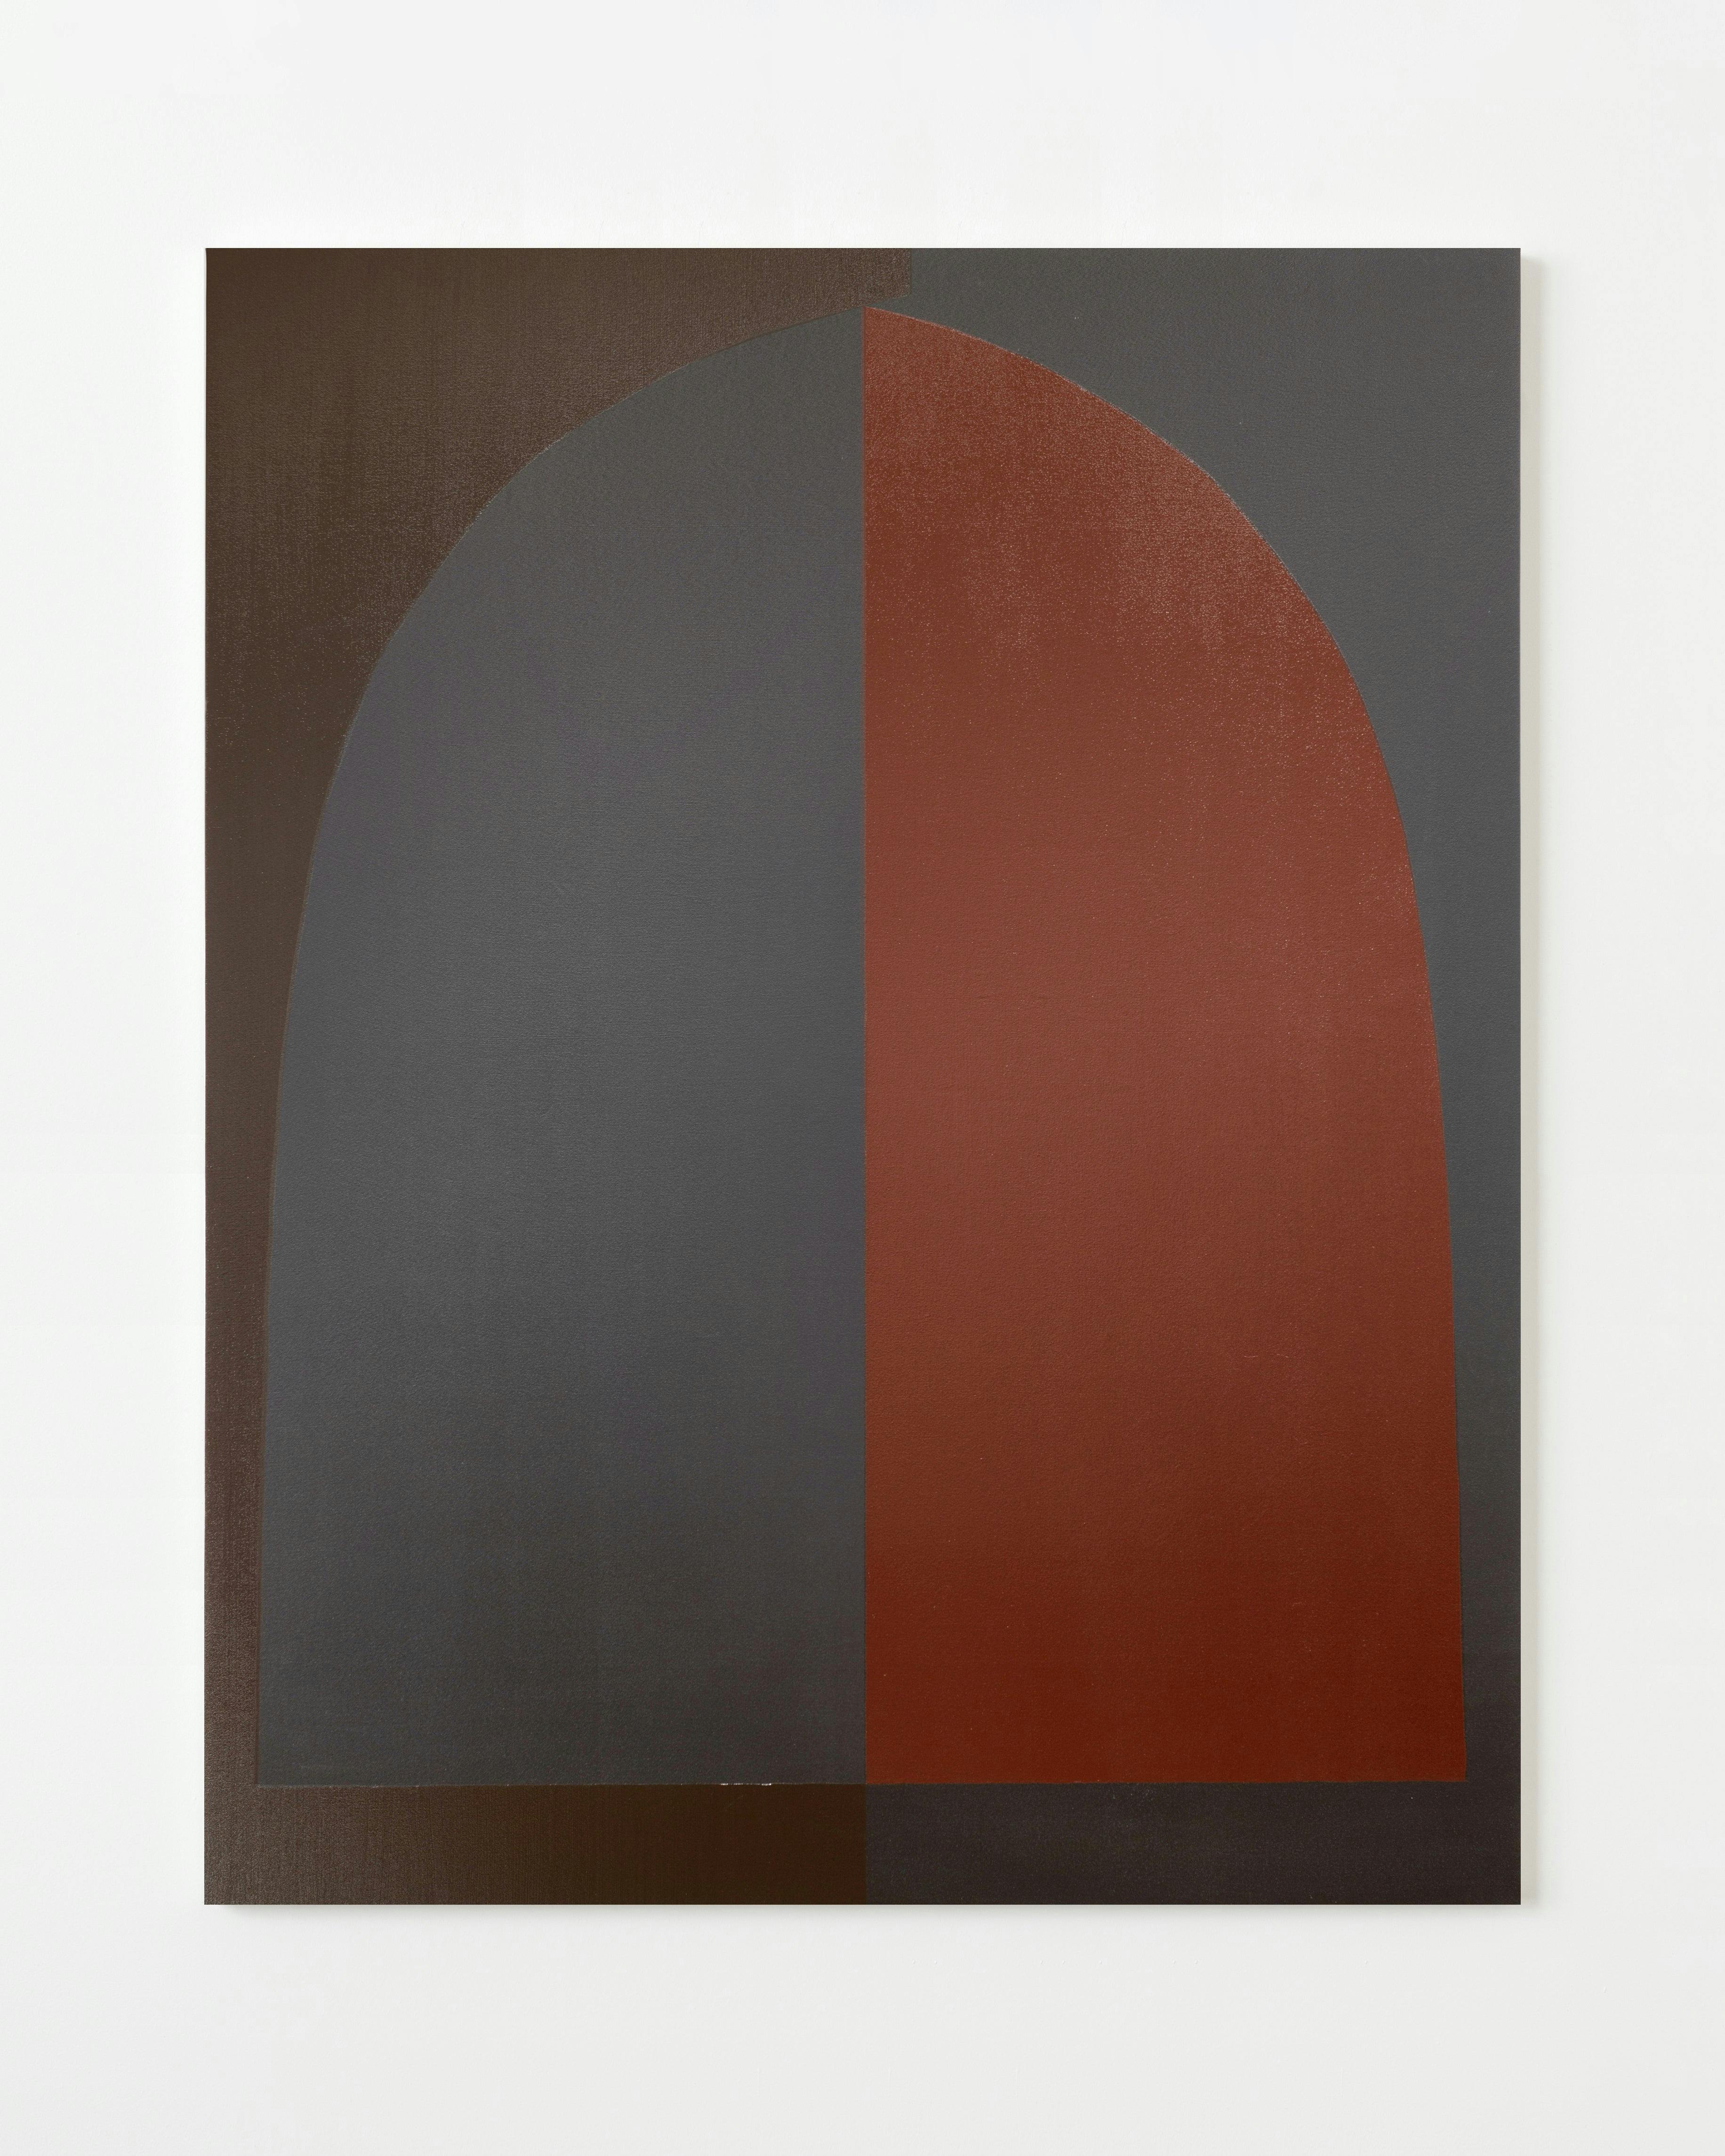 Painting by Aschely Vaughan Cone titled "Red Black Arch Doublet".